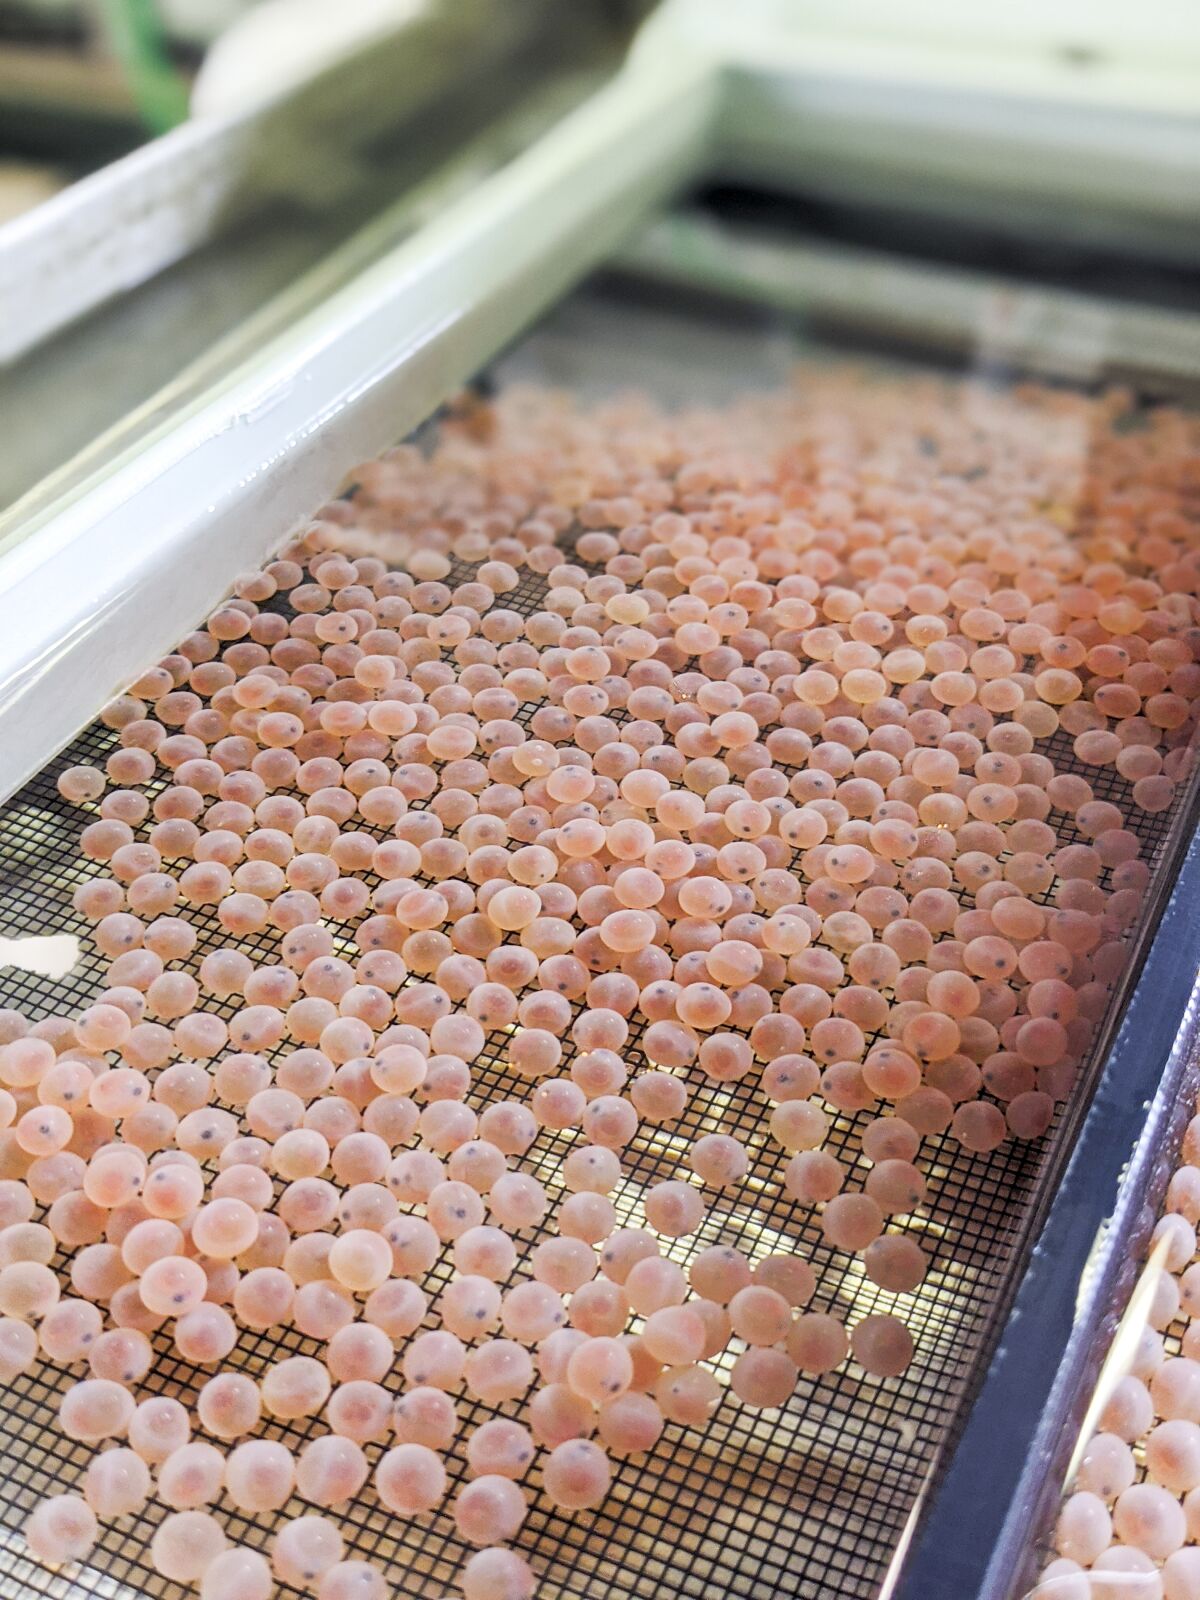 A layer of pink salmon roe covers a screen.